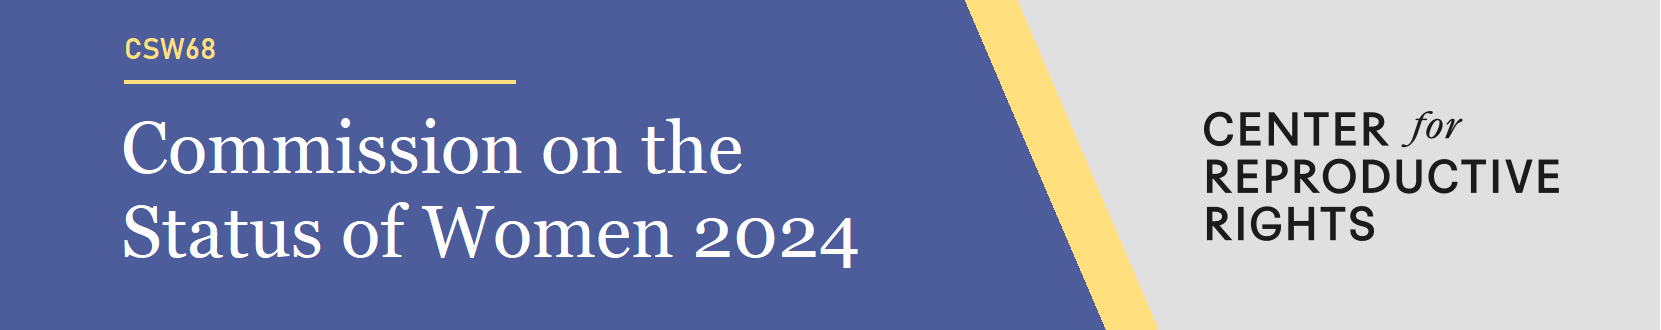 Banner graphic reading "Commission on the Status of Women 2024—Center for Reproductive Rights" with a yellow, gray, and indigo color scheme